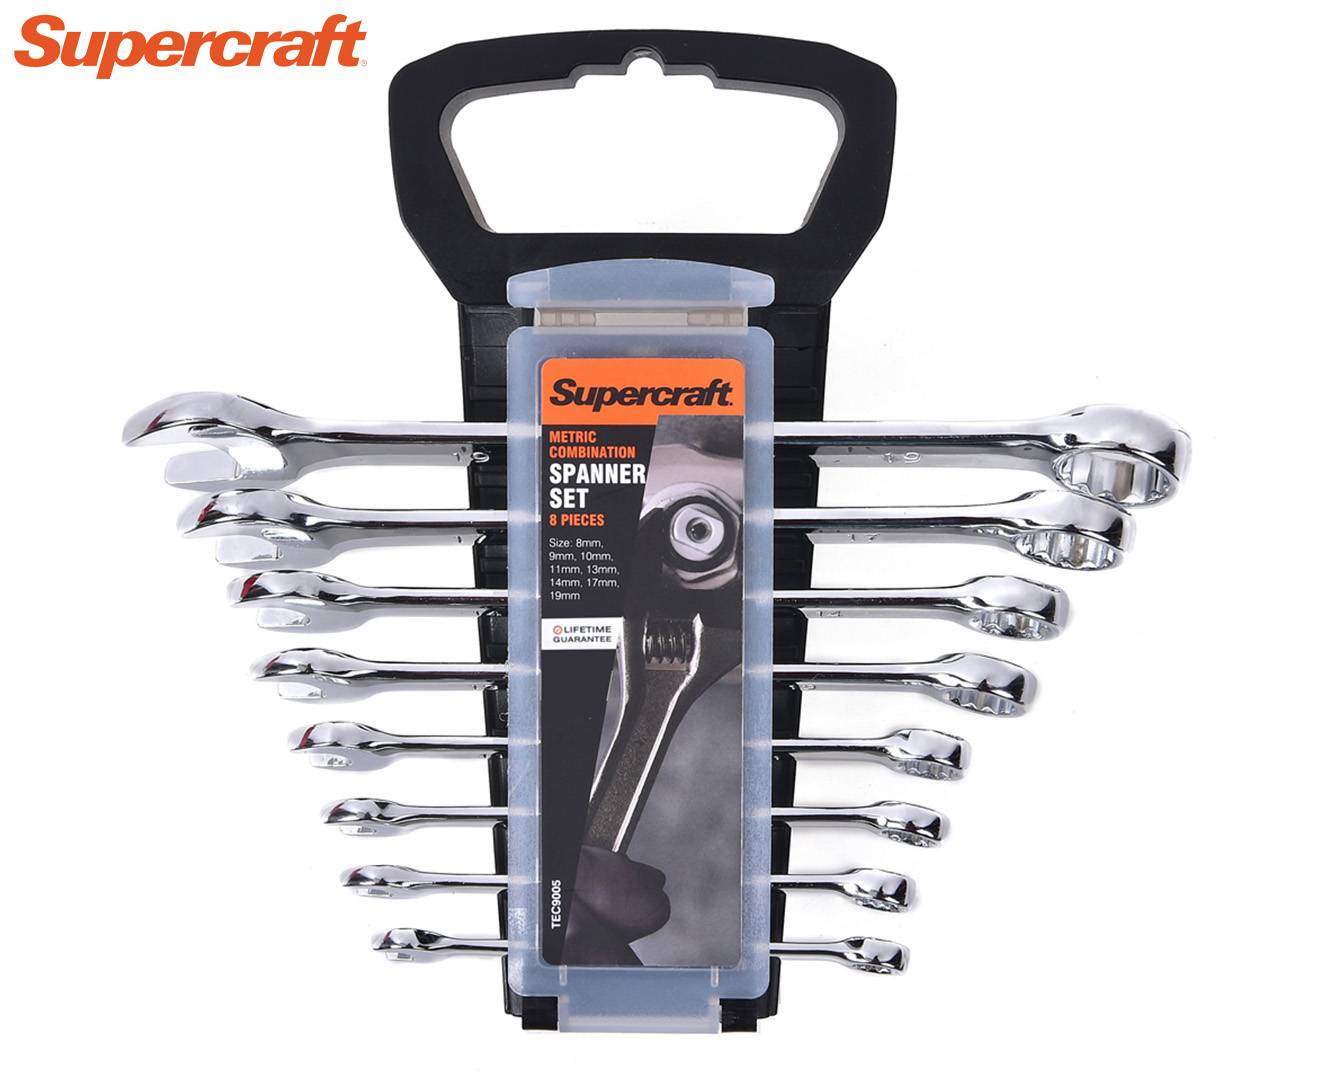 5PC RING RATCHET SPANNER SET 6-21mm DIY TOOL WRENCH MECHANIC GARAGE IMPERIAL 